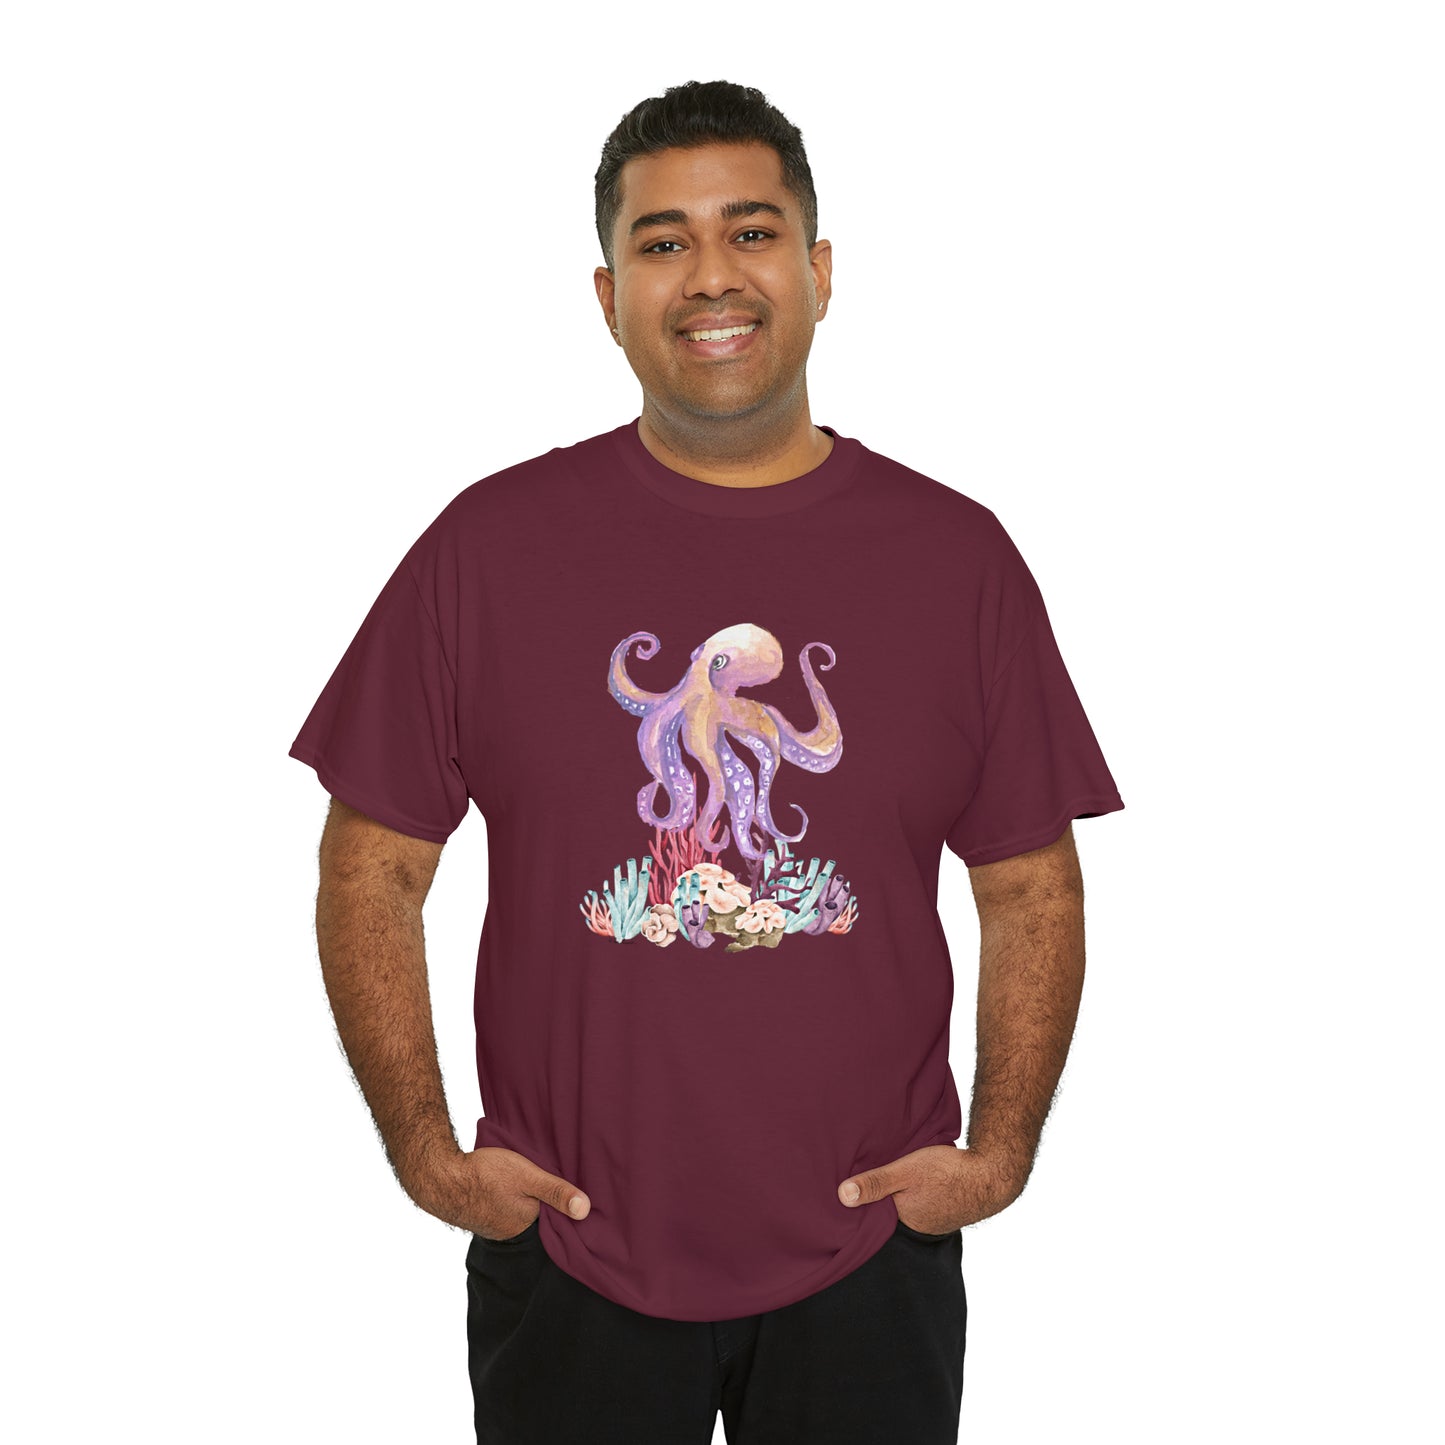 Mock up of a large man wearing the Maroon shirt